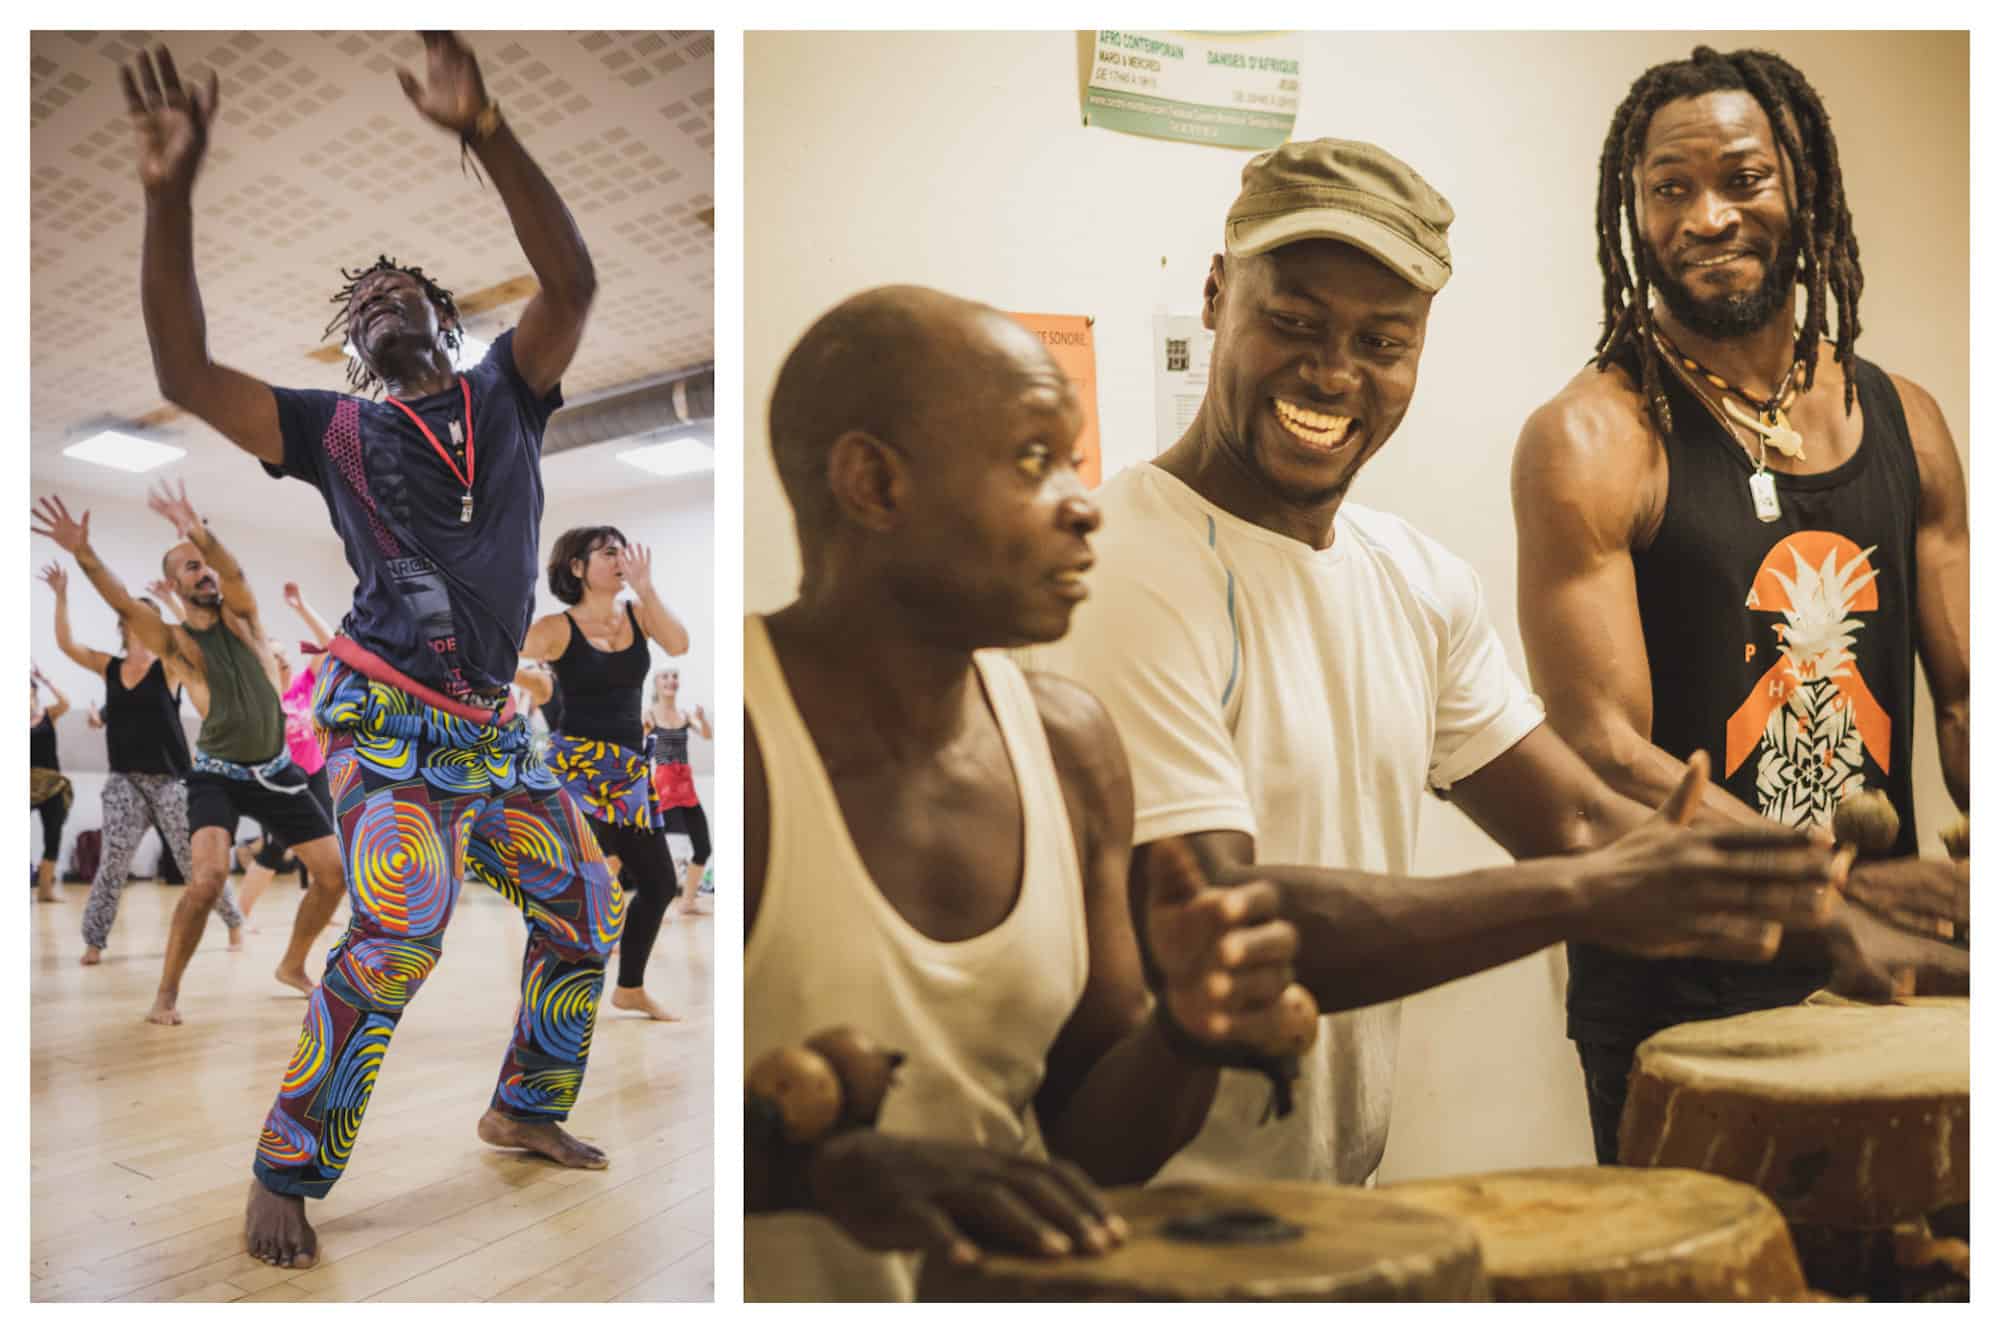 A class in action at African dance studio Momboye in Paris (left). Three smiling live music performers on the drums lead the class (right).